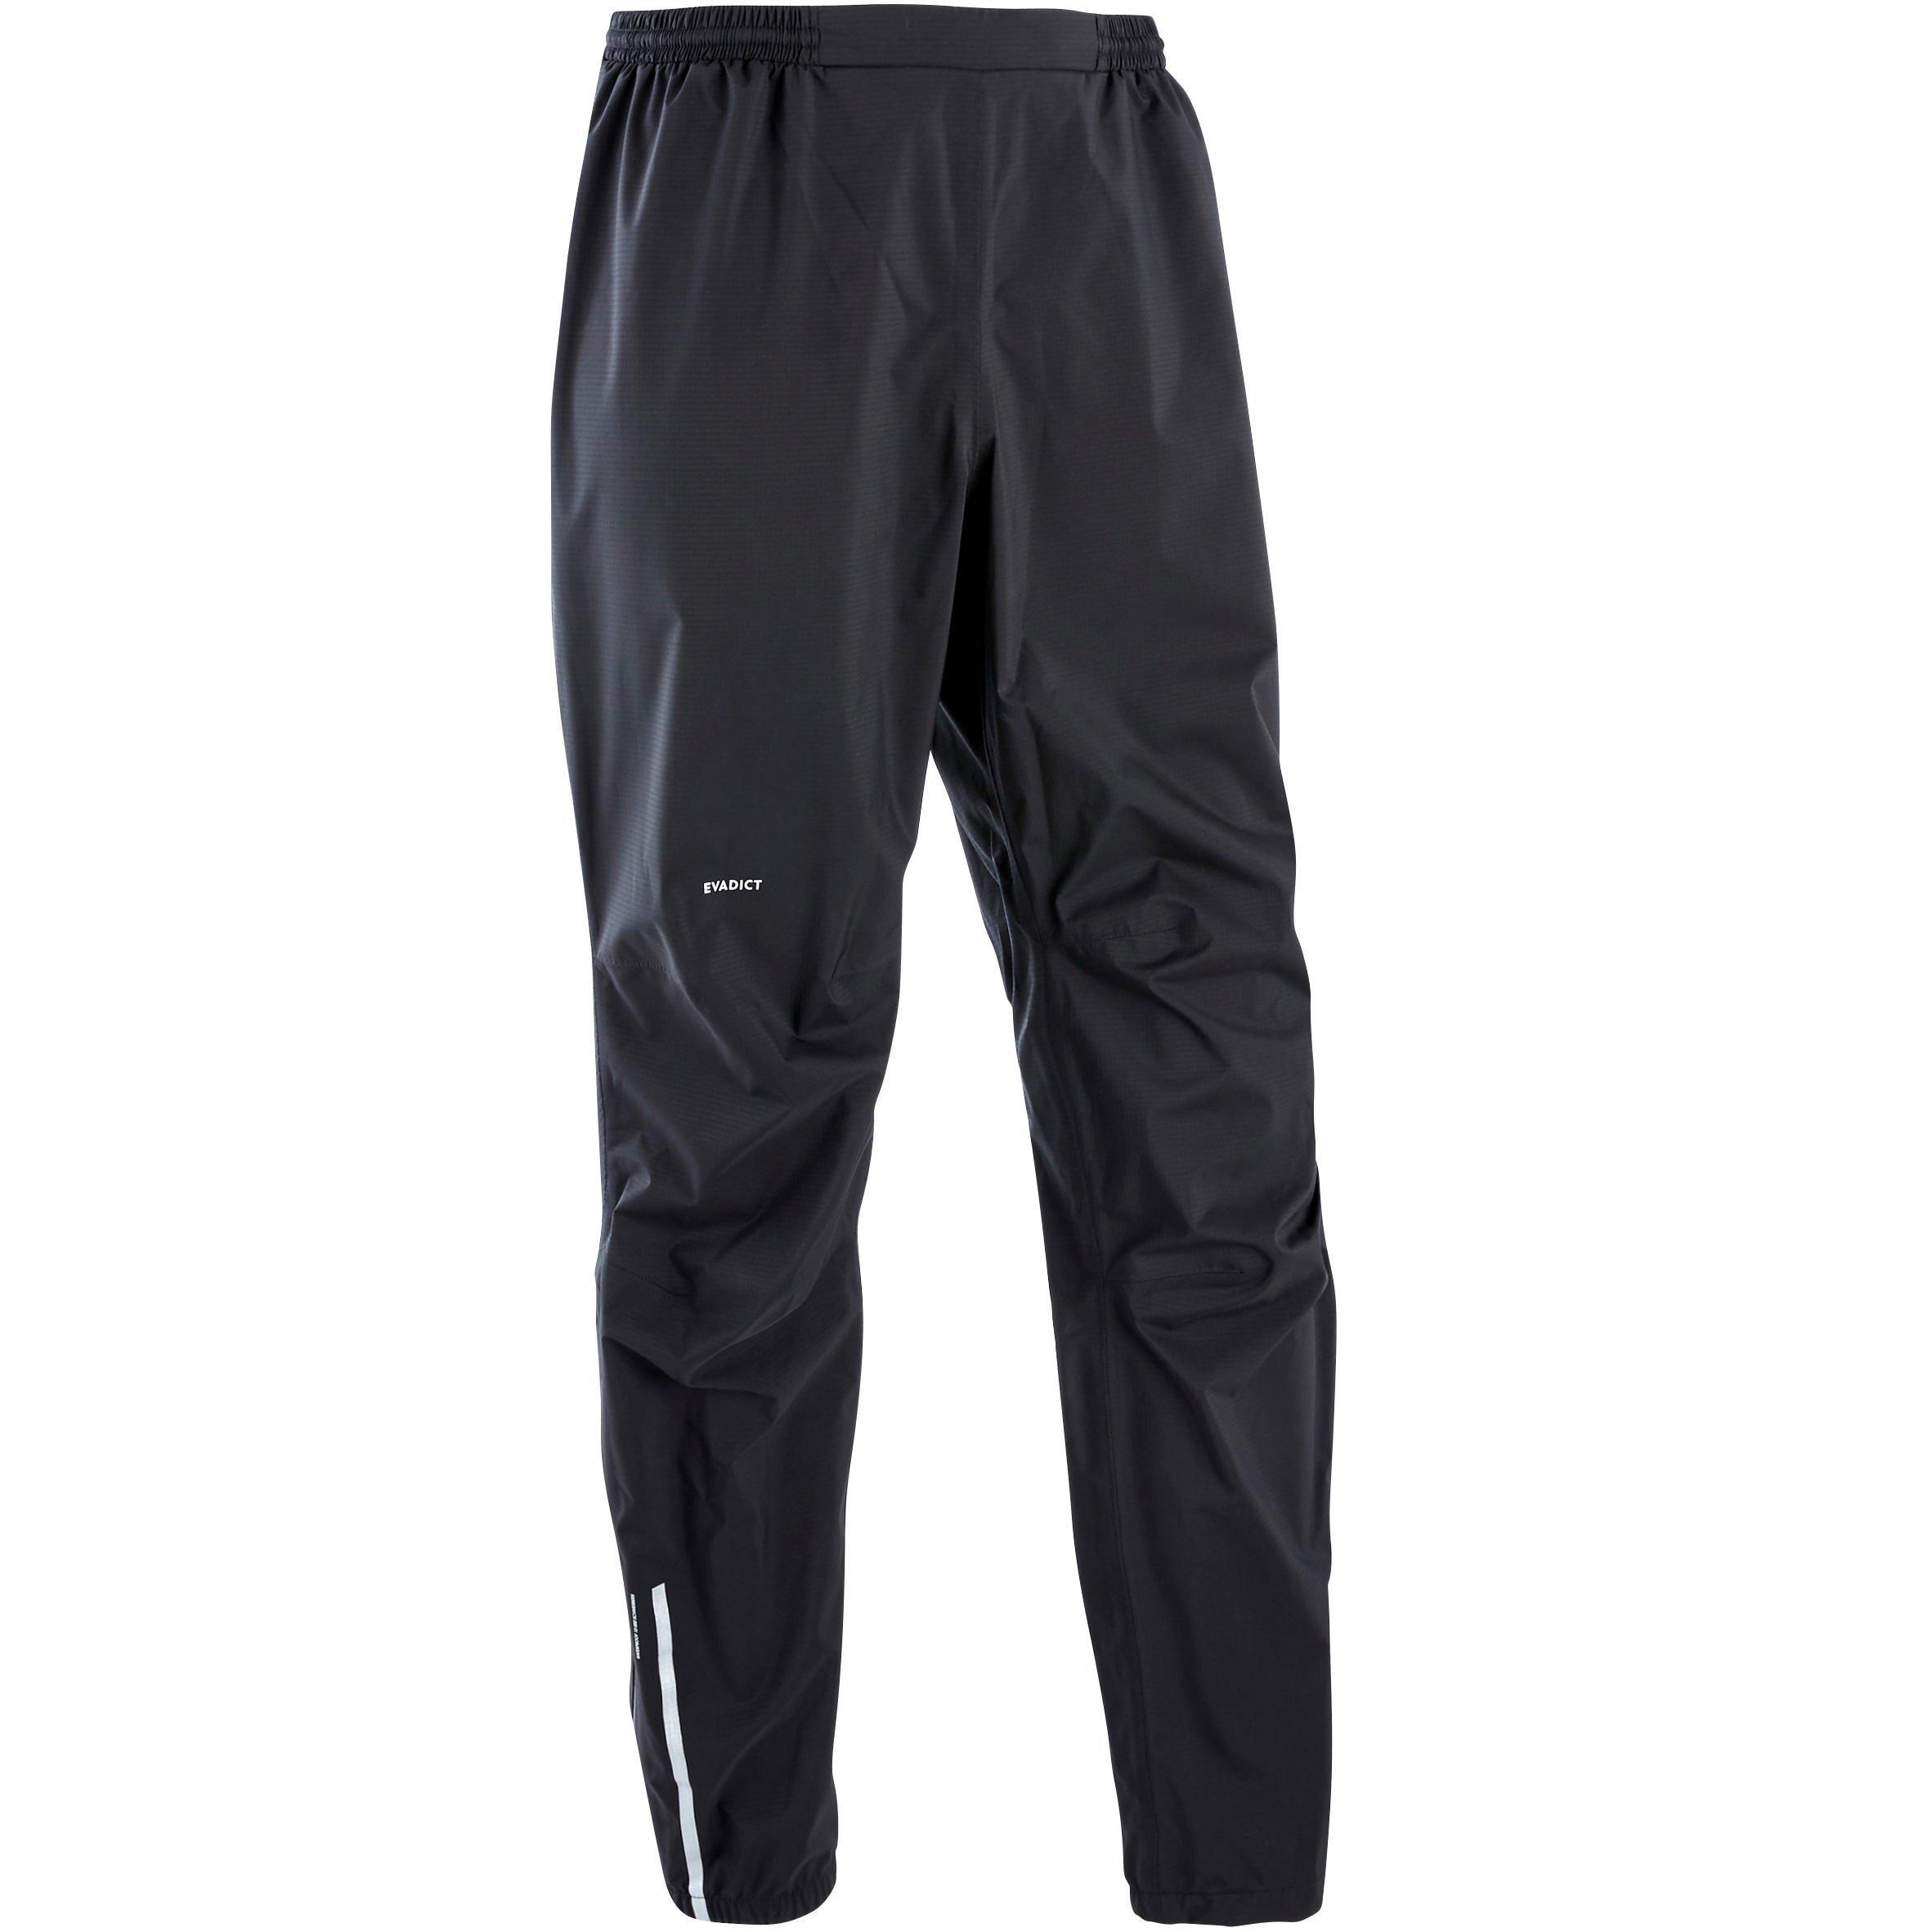 Decathlon Brand New Women's Waterproof Trousers Pants - Small W28 L31,  Sports Equipment, Hiking & Camping on Carousell